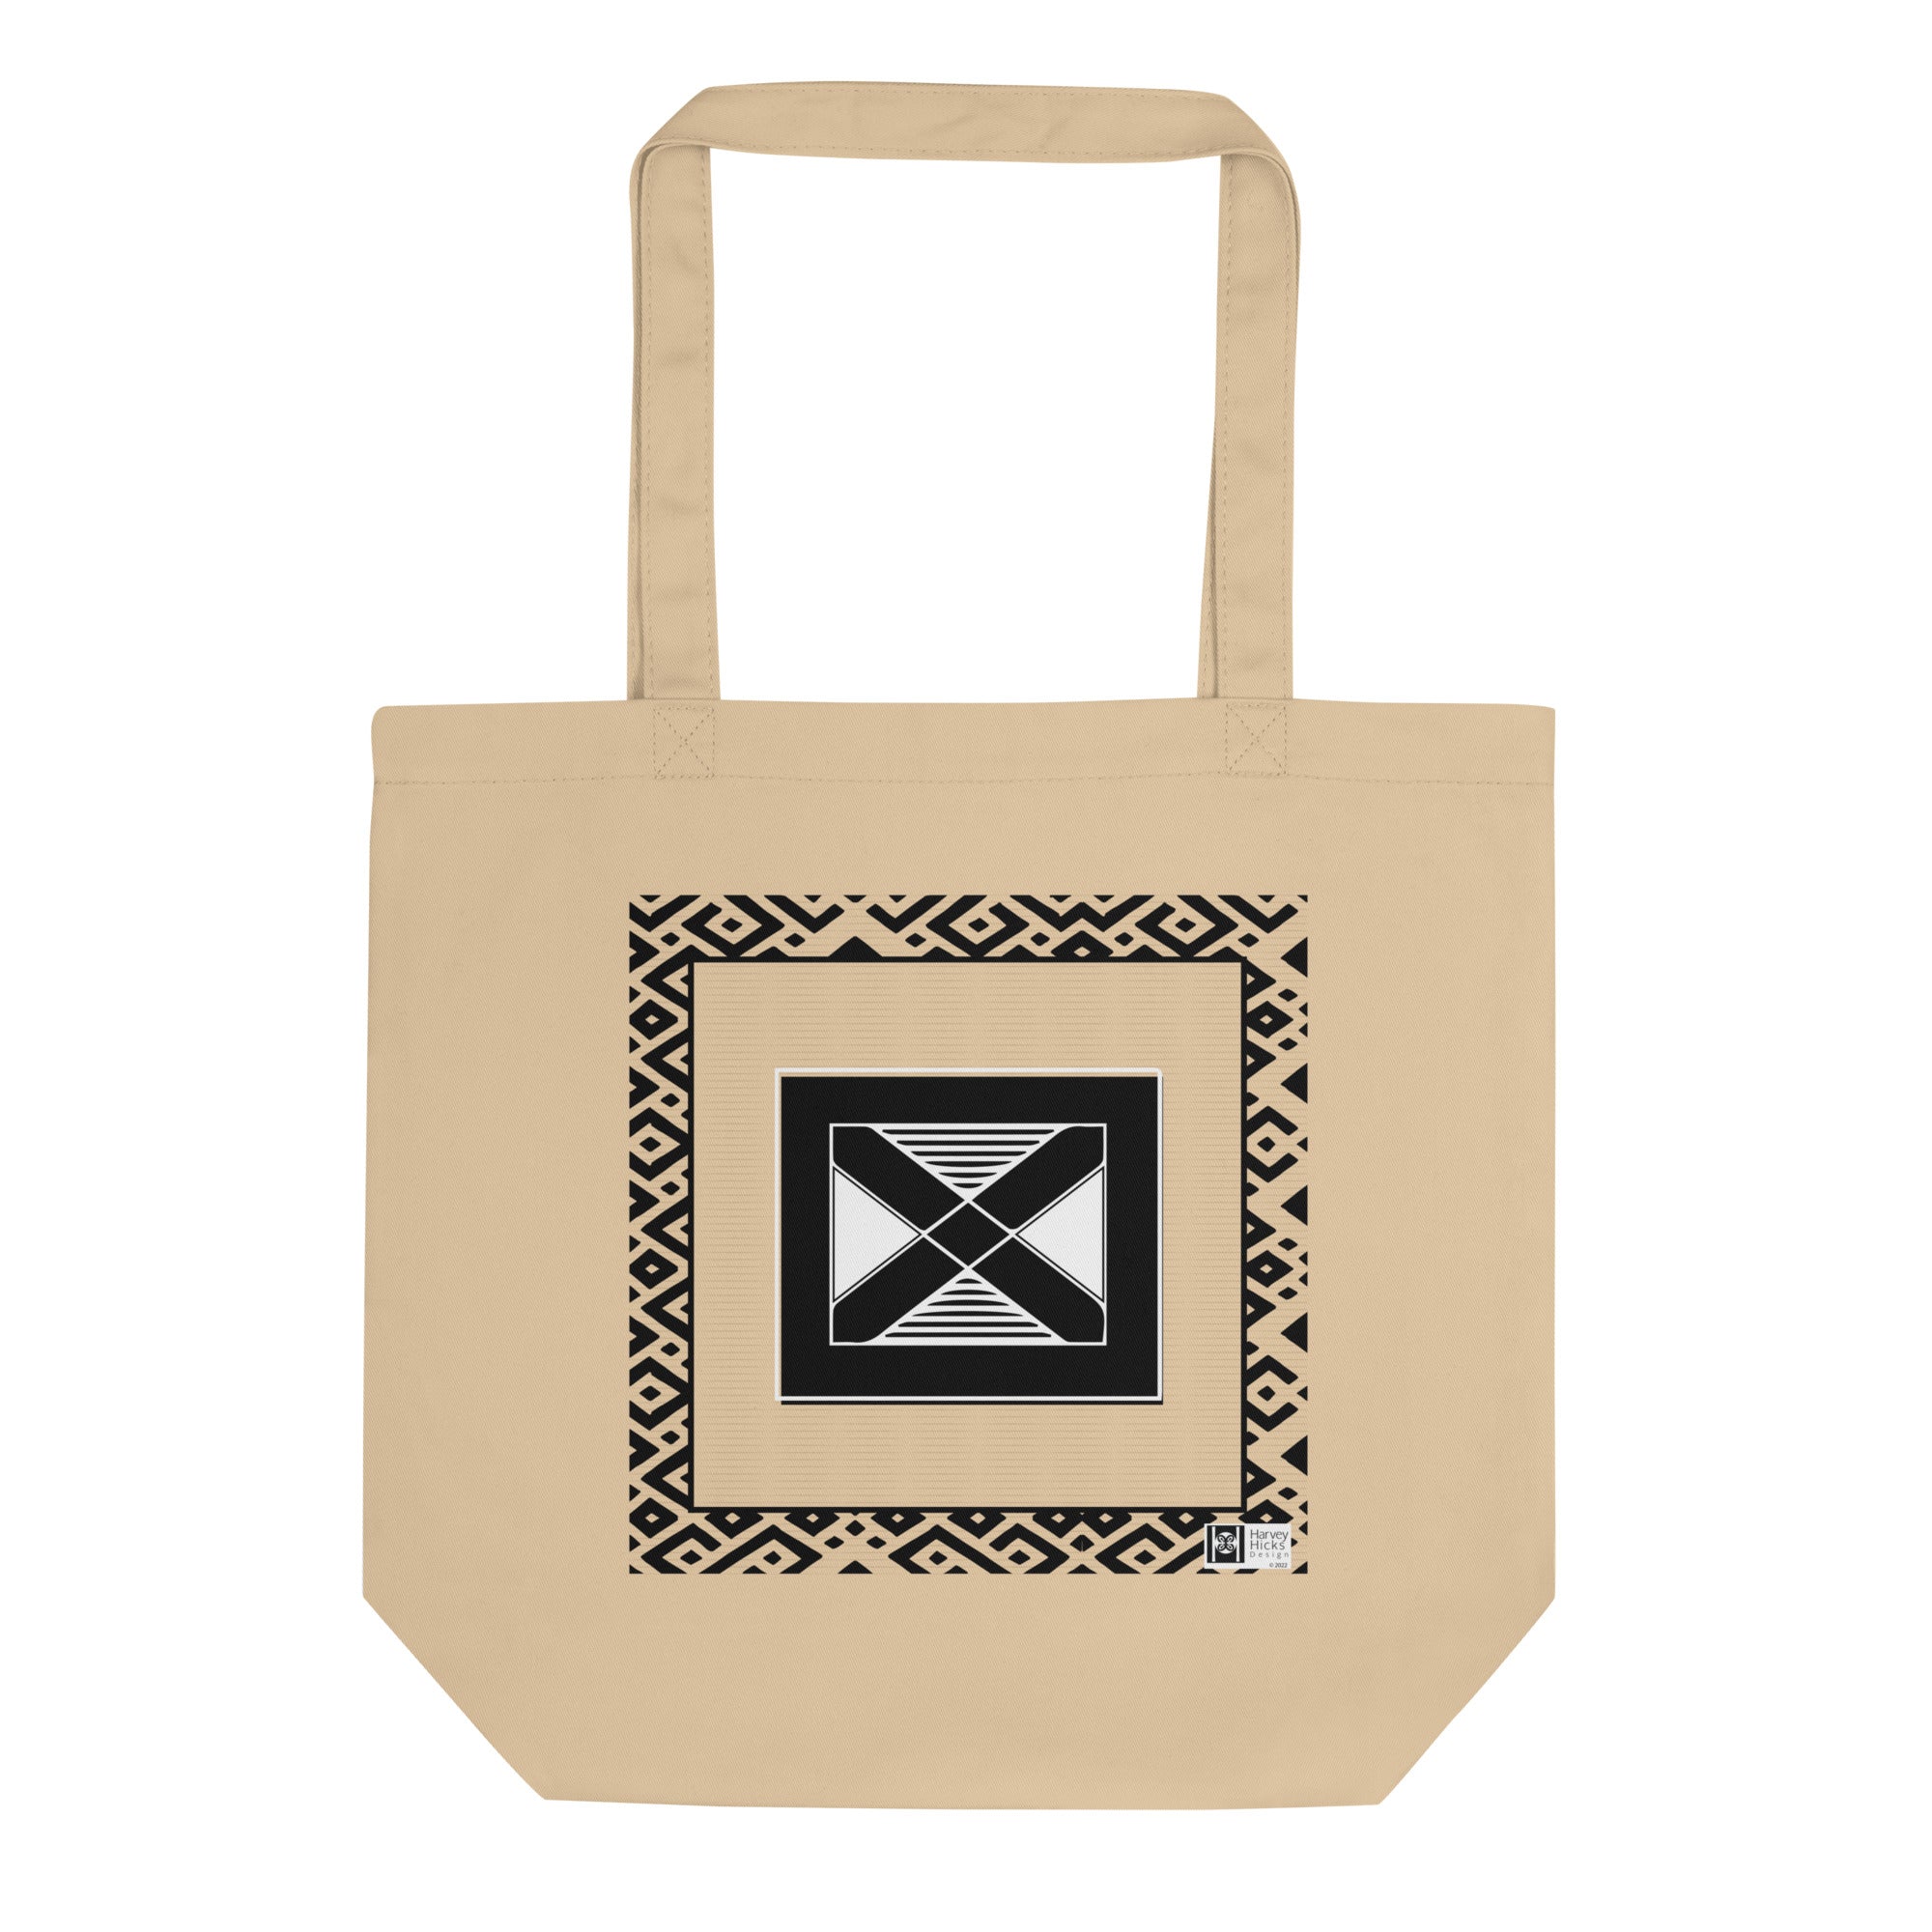 100% cotton Eco Tote Bag, featuring the Adinkra symbol for resilience, NO TEXT